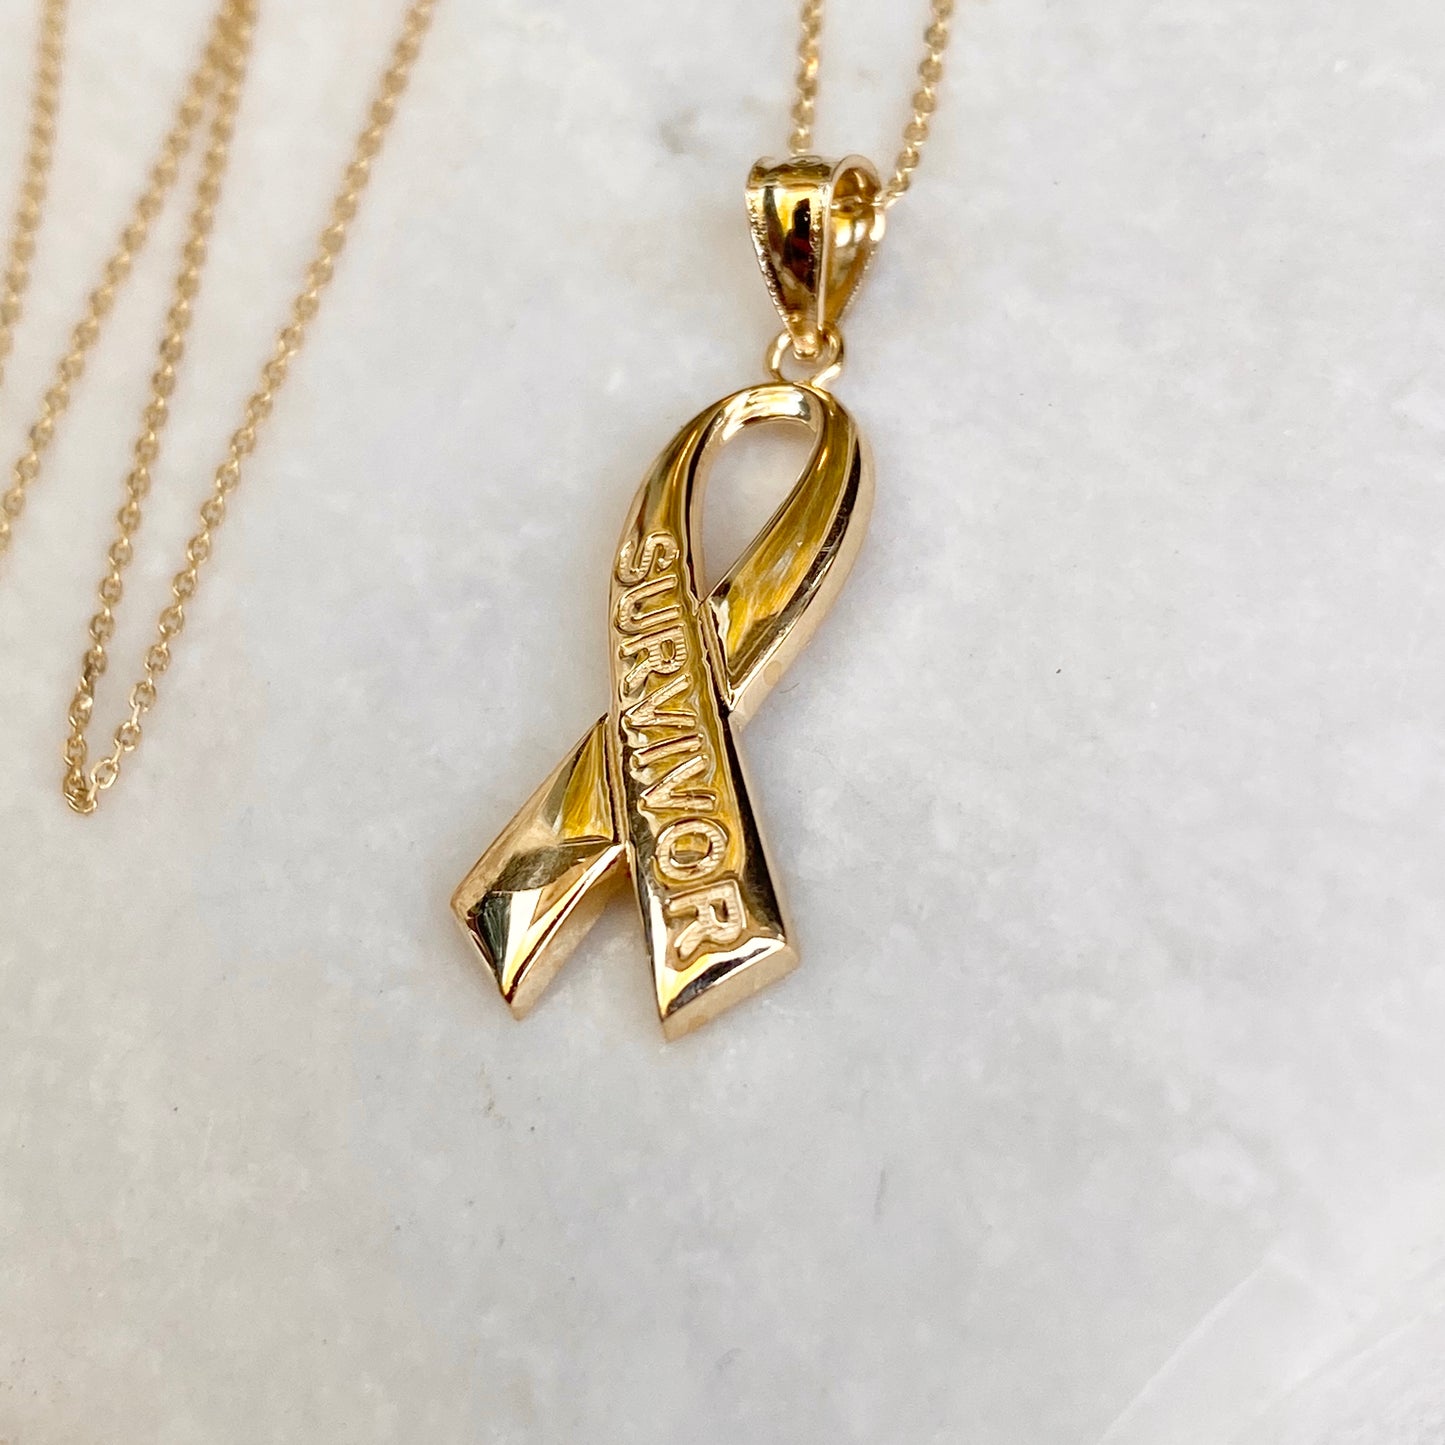 14KT Yellow Gold Cancer Awareness Survivor Ribbon Pendant Chain Necklace